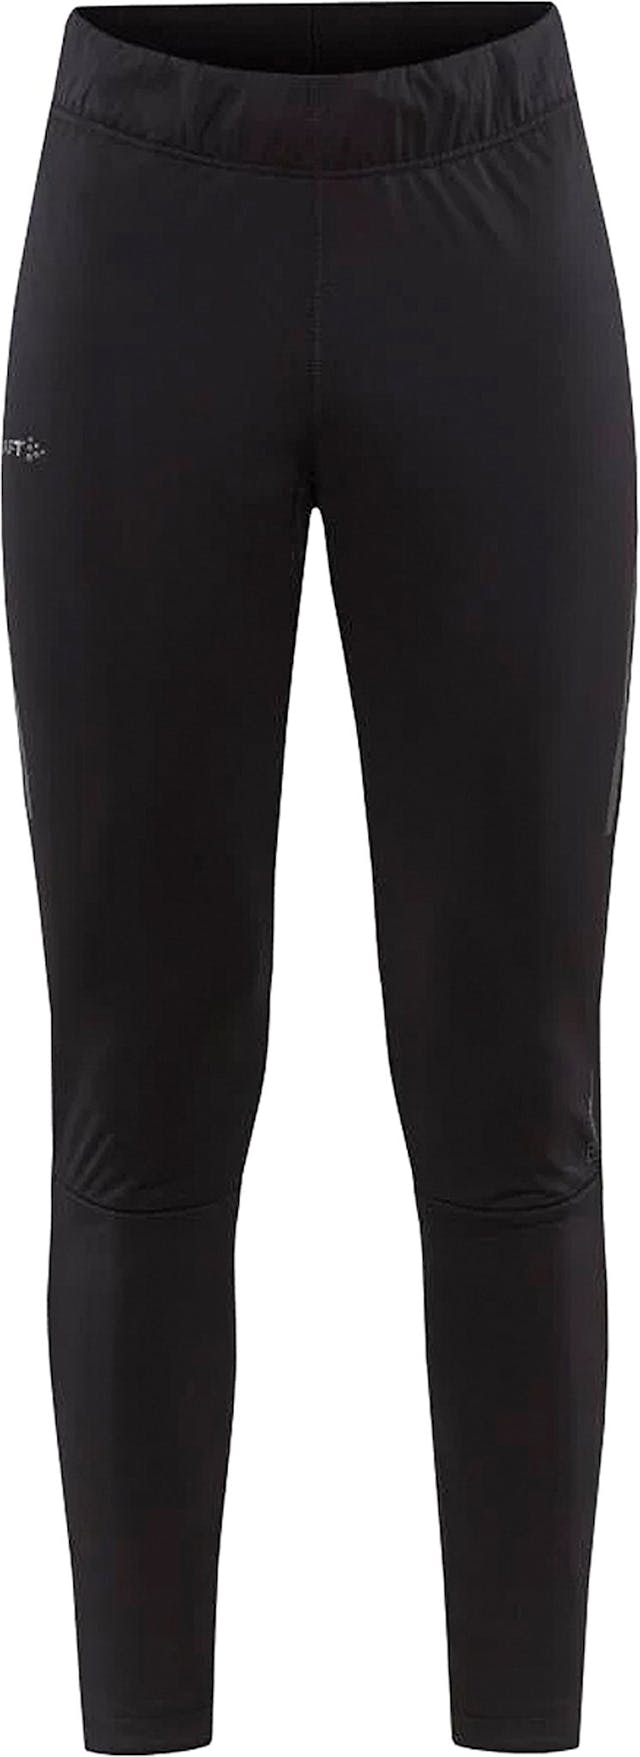 Product image for Core Nordic Training Wind Tights - Women's